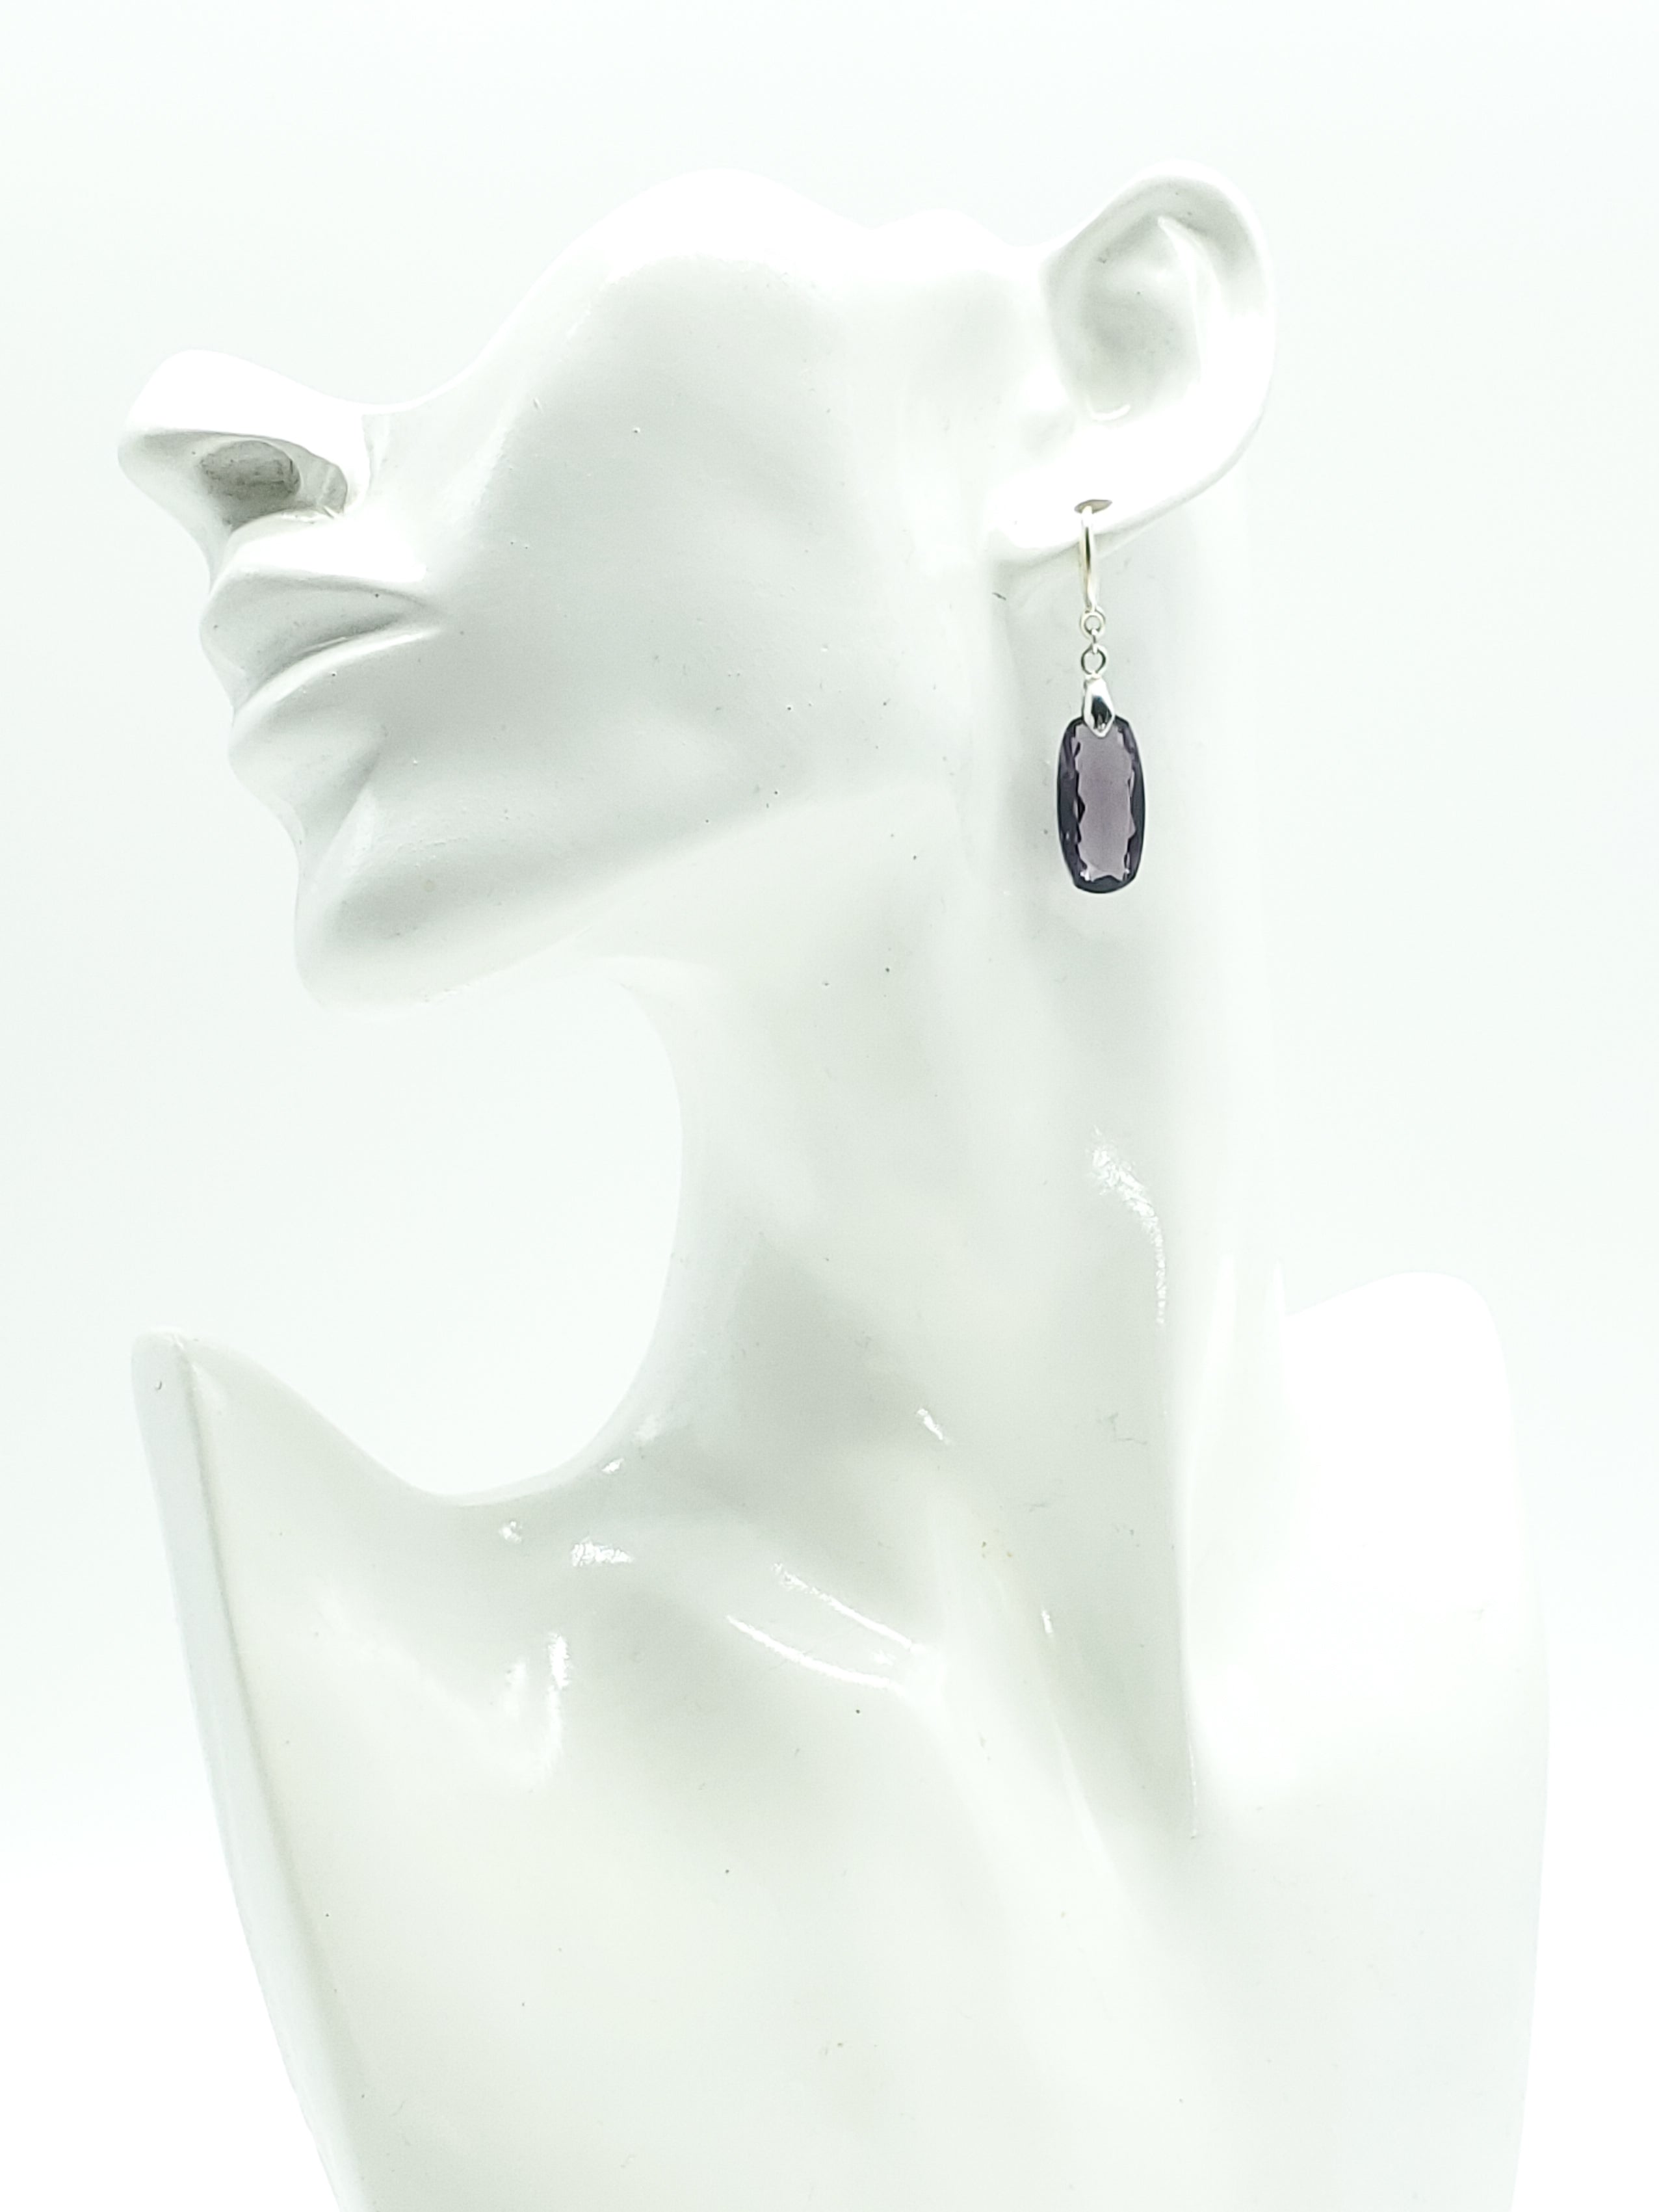 Cushion Cut Hydro Amethyst Earrings on Sterling Silver Bails and Ear Wires - The Caffeinated Raven